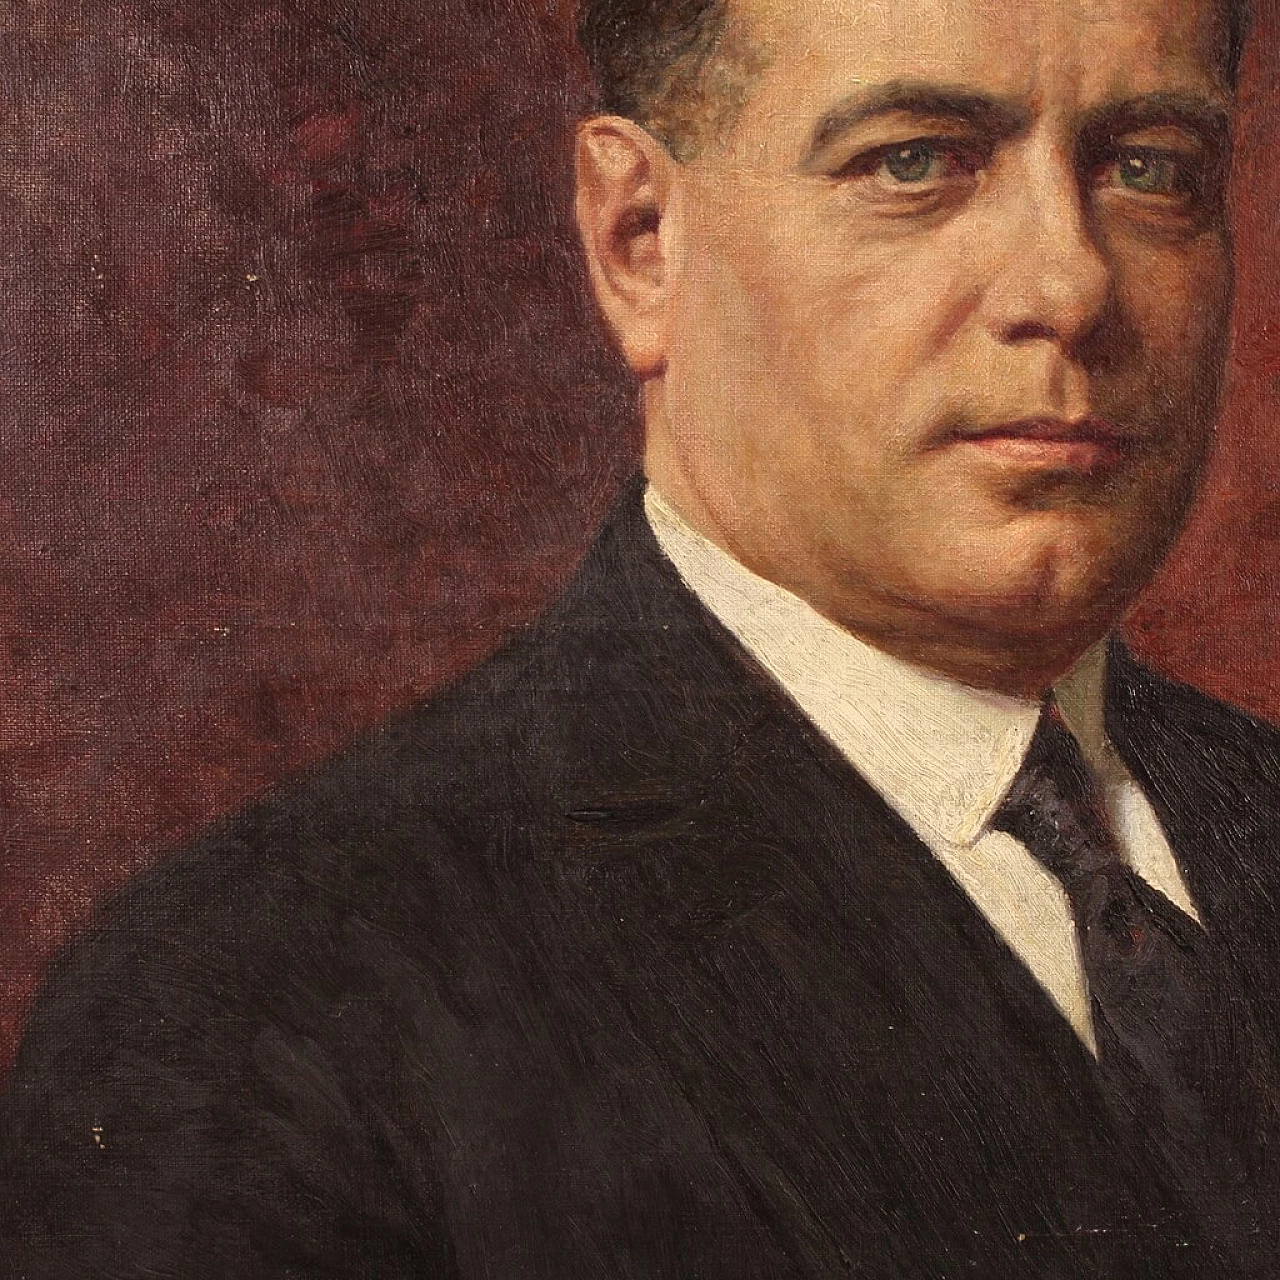 Angelo Garino, male portrait, oil painting on canvas, 1931 9